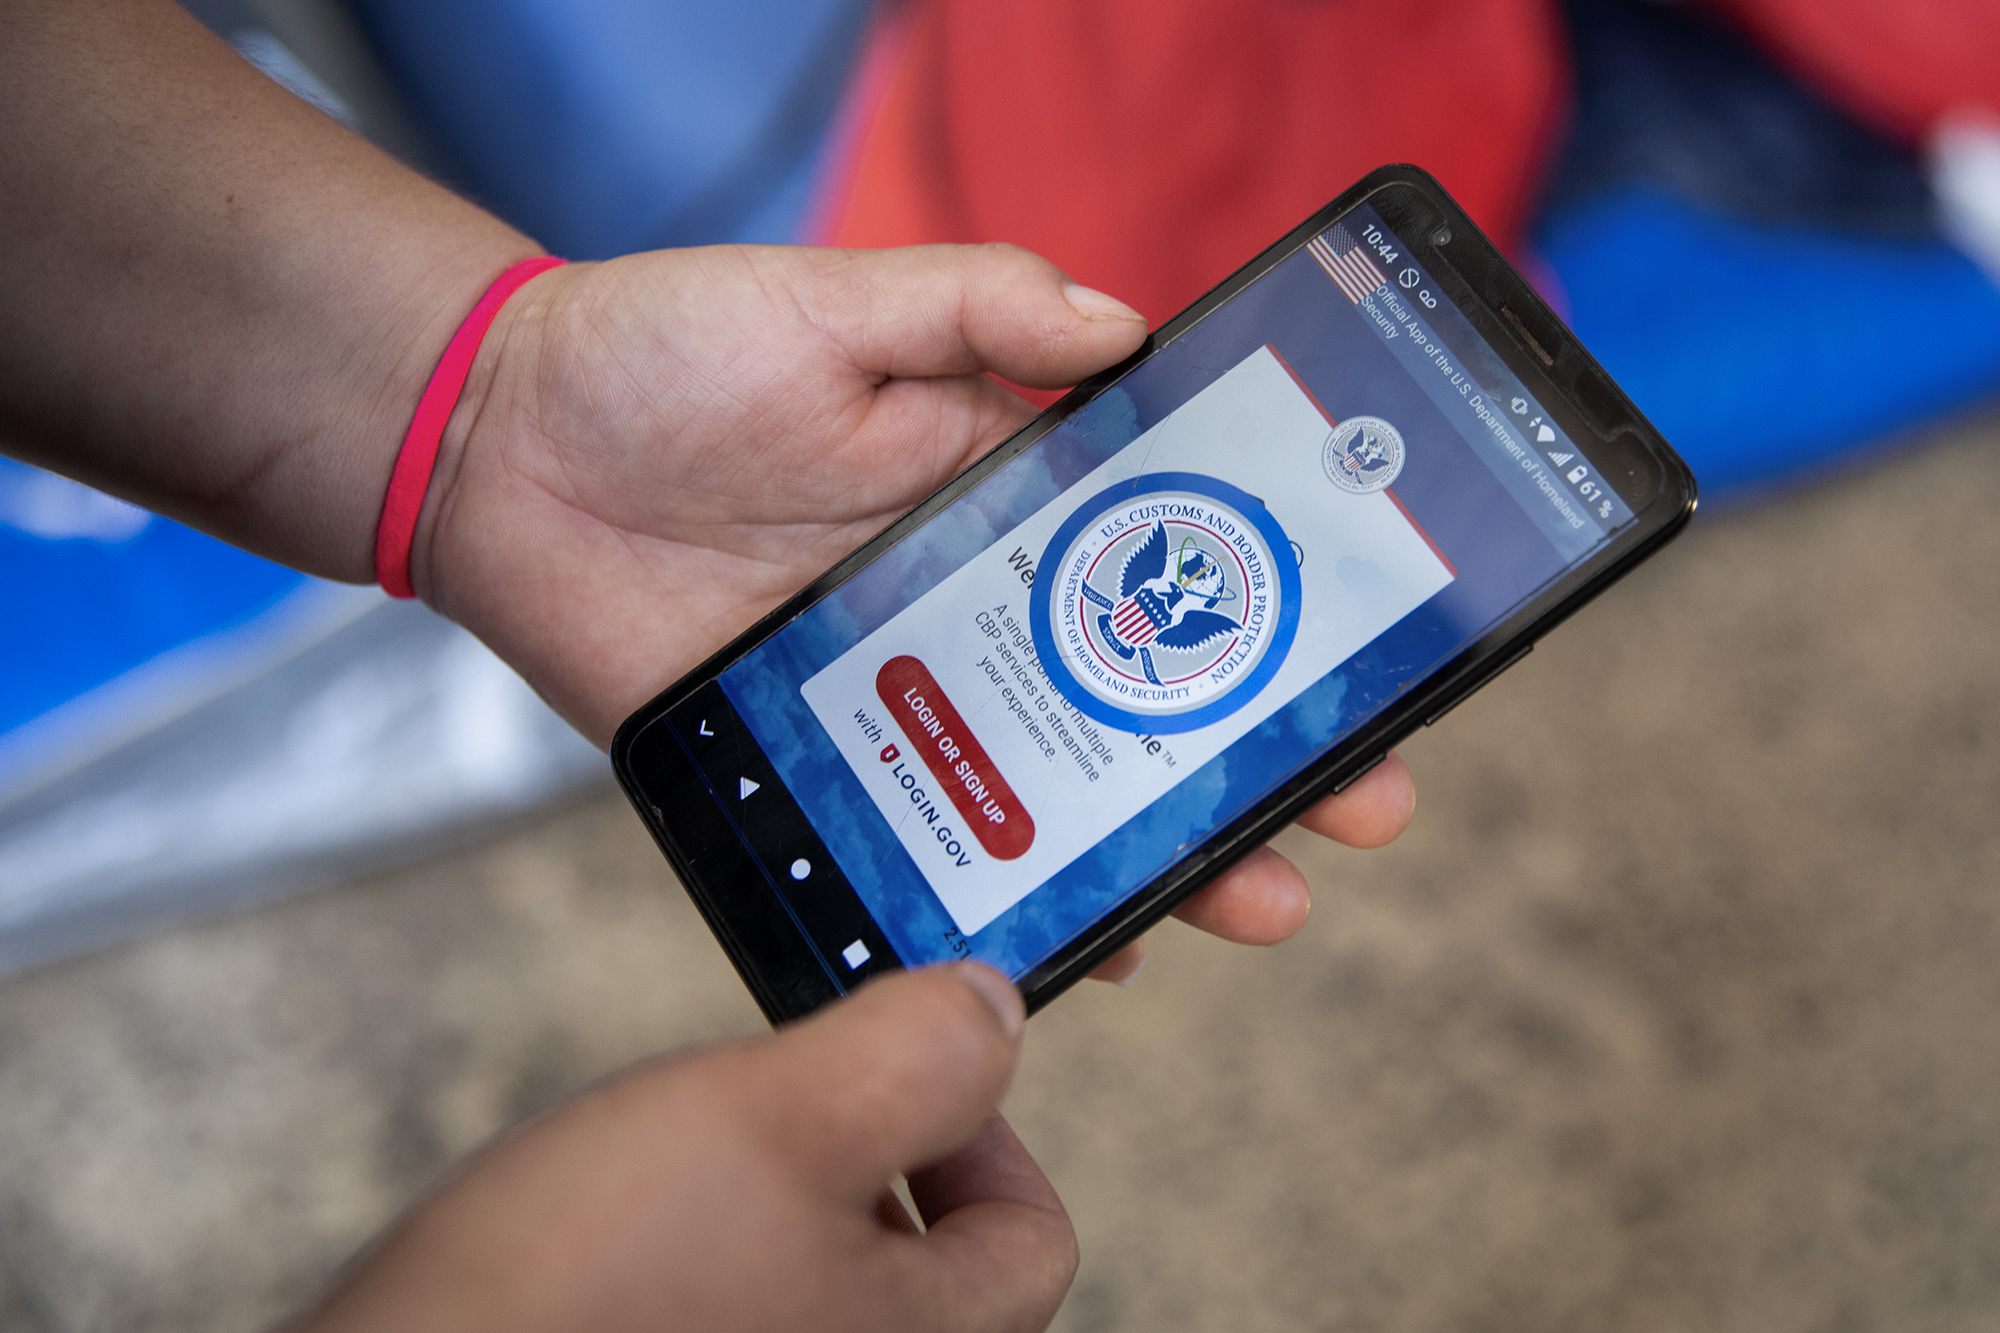 A person holds a cellphone with a message that displays a red, white and blue logo from the U.S. Department of Homeland Security.